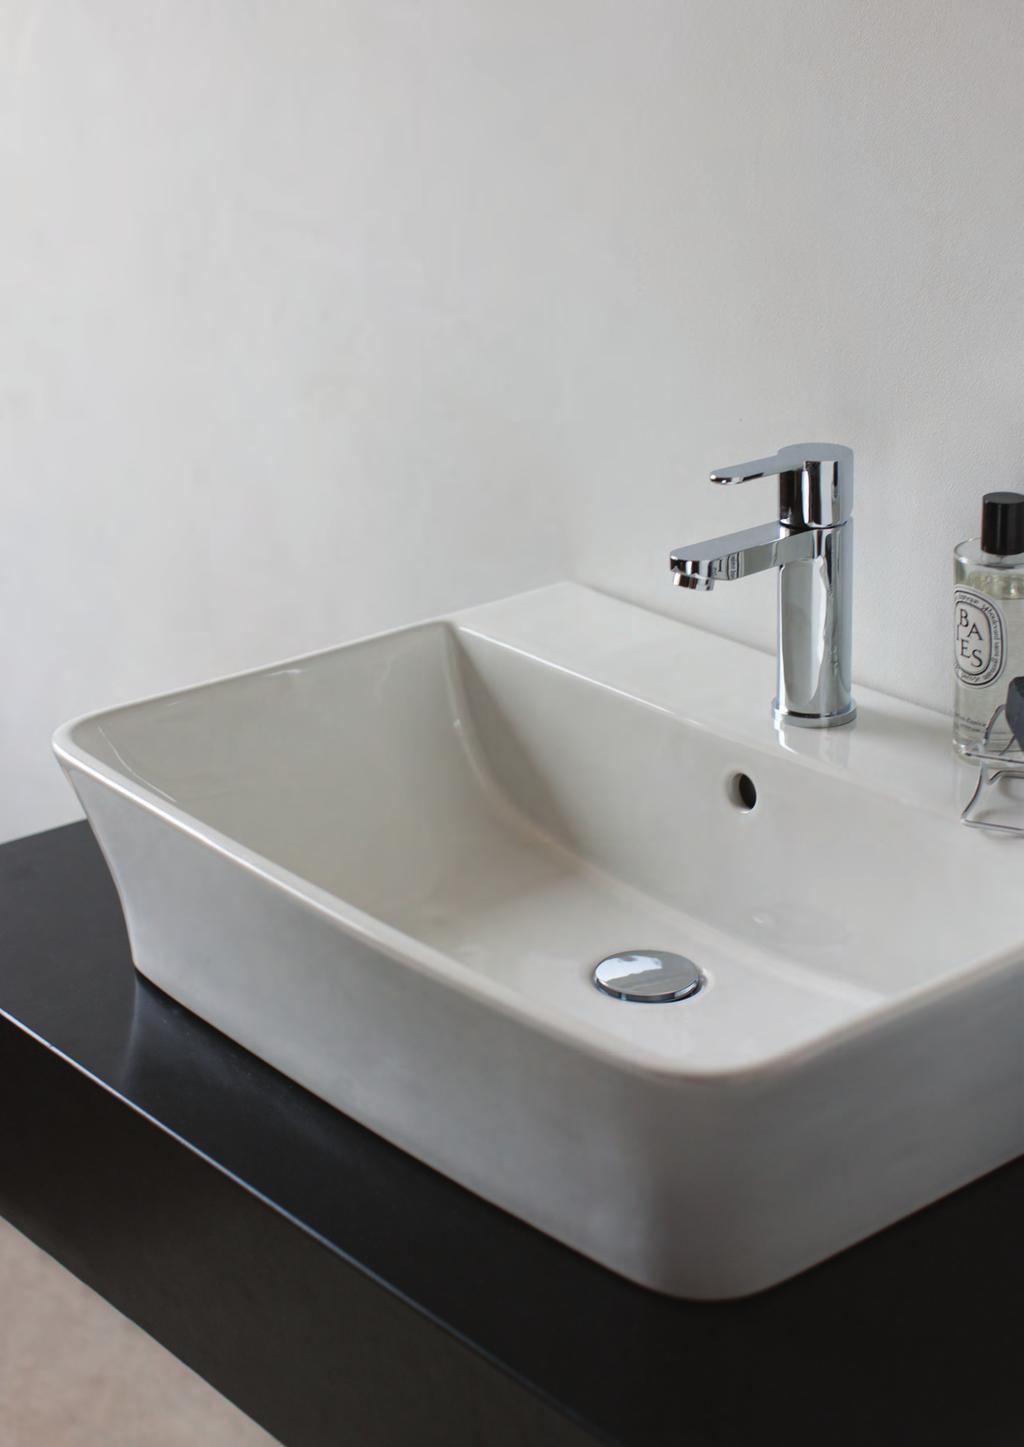 CERAMICS CERAMICS COUNTER-TOP BASIN To make the most out of your beautiful